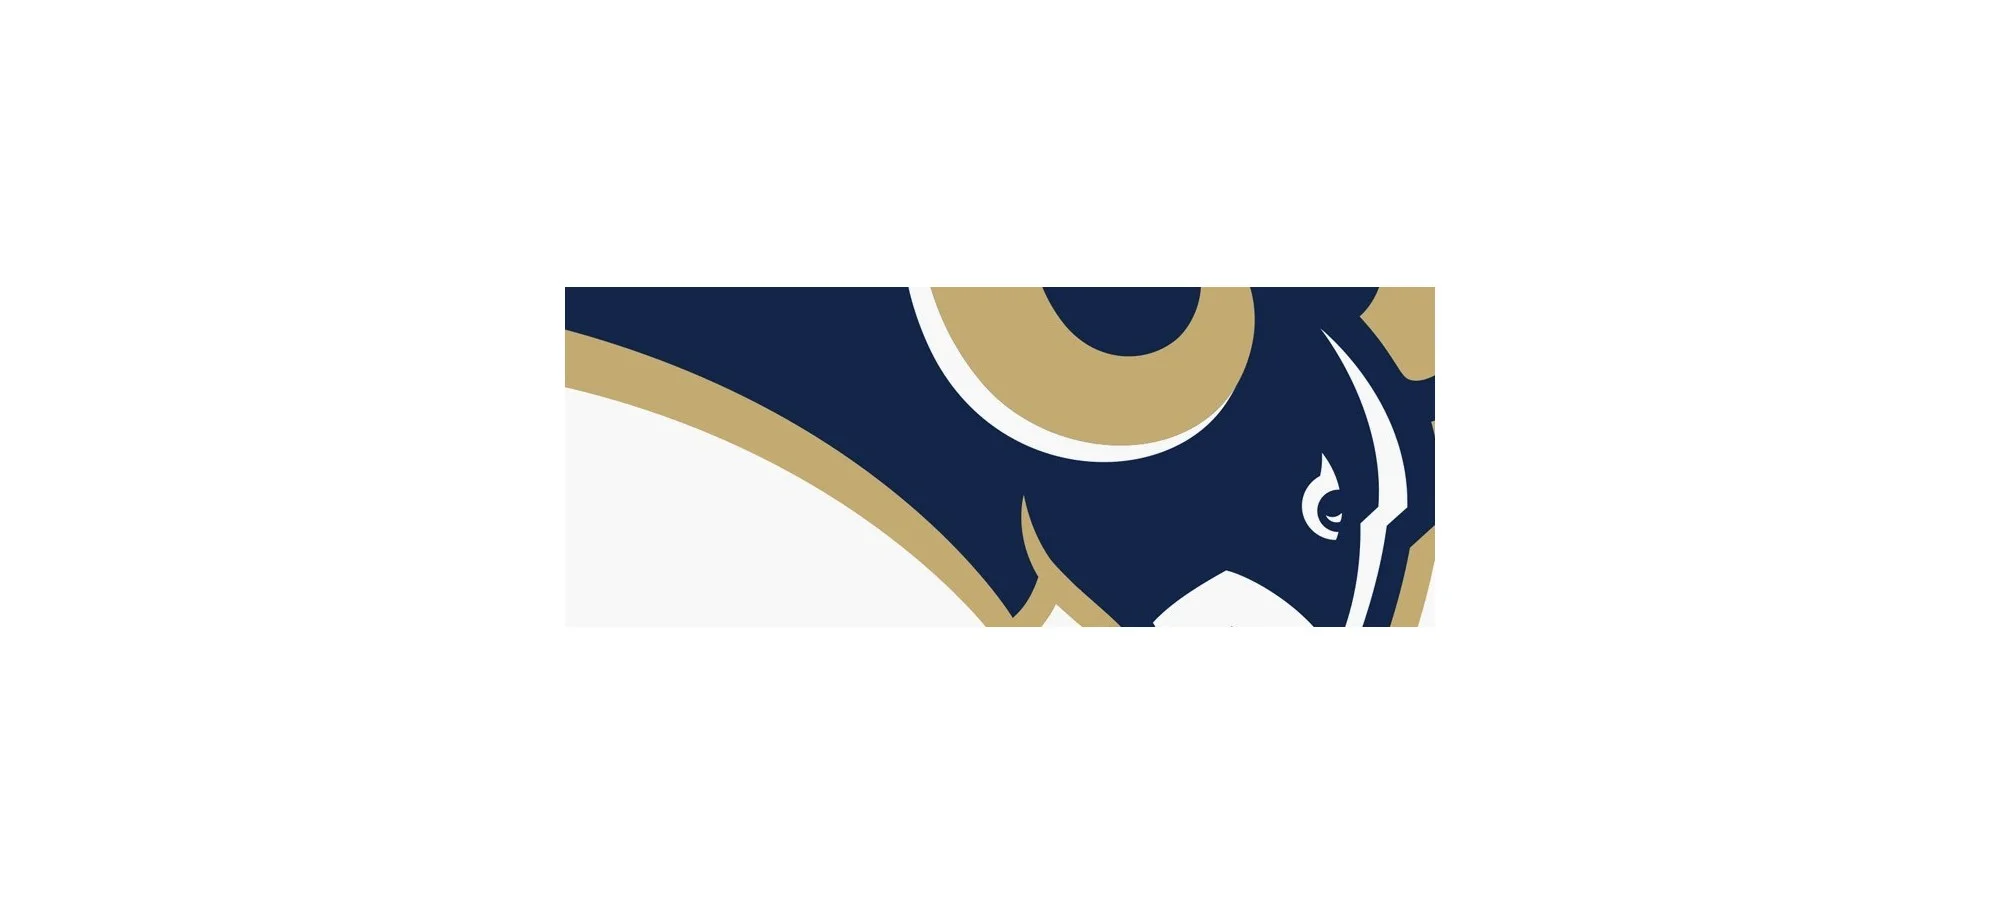 Clearance Los Angeles Rams